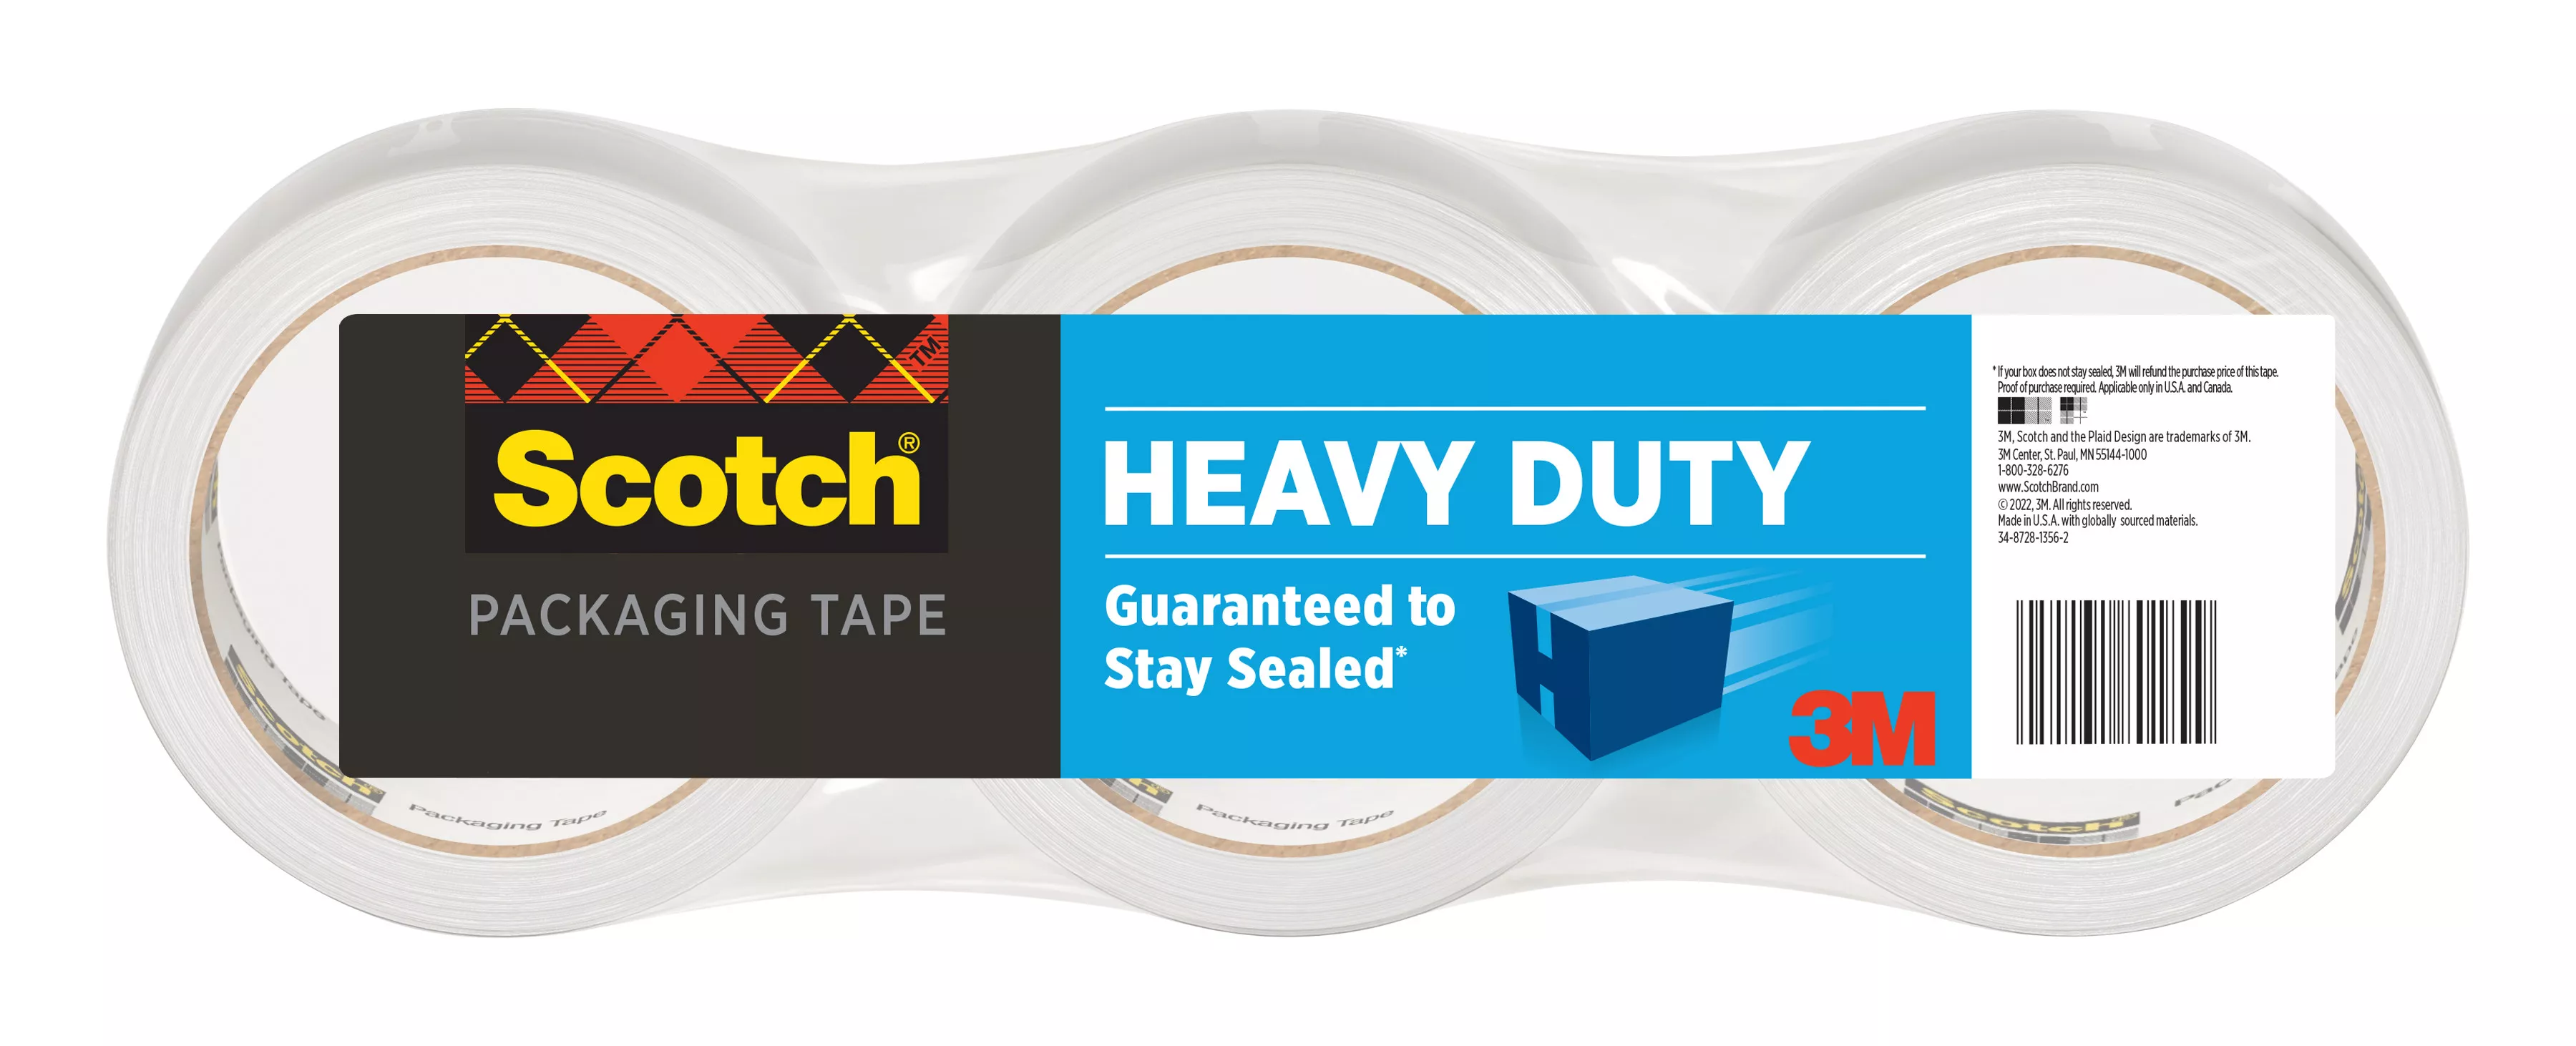 Scotch® Heavy Duty Shipping Packaging Tape, 3850-40-6, 1.88 in x 43.7 yd
(48 mm x 40 m) 3 Pack